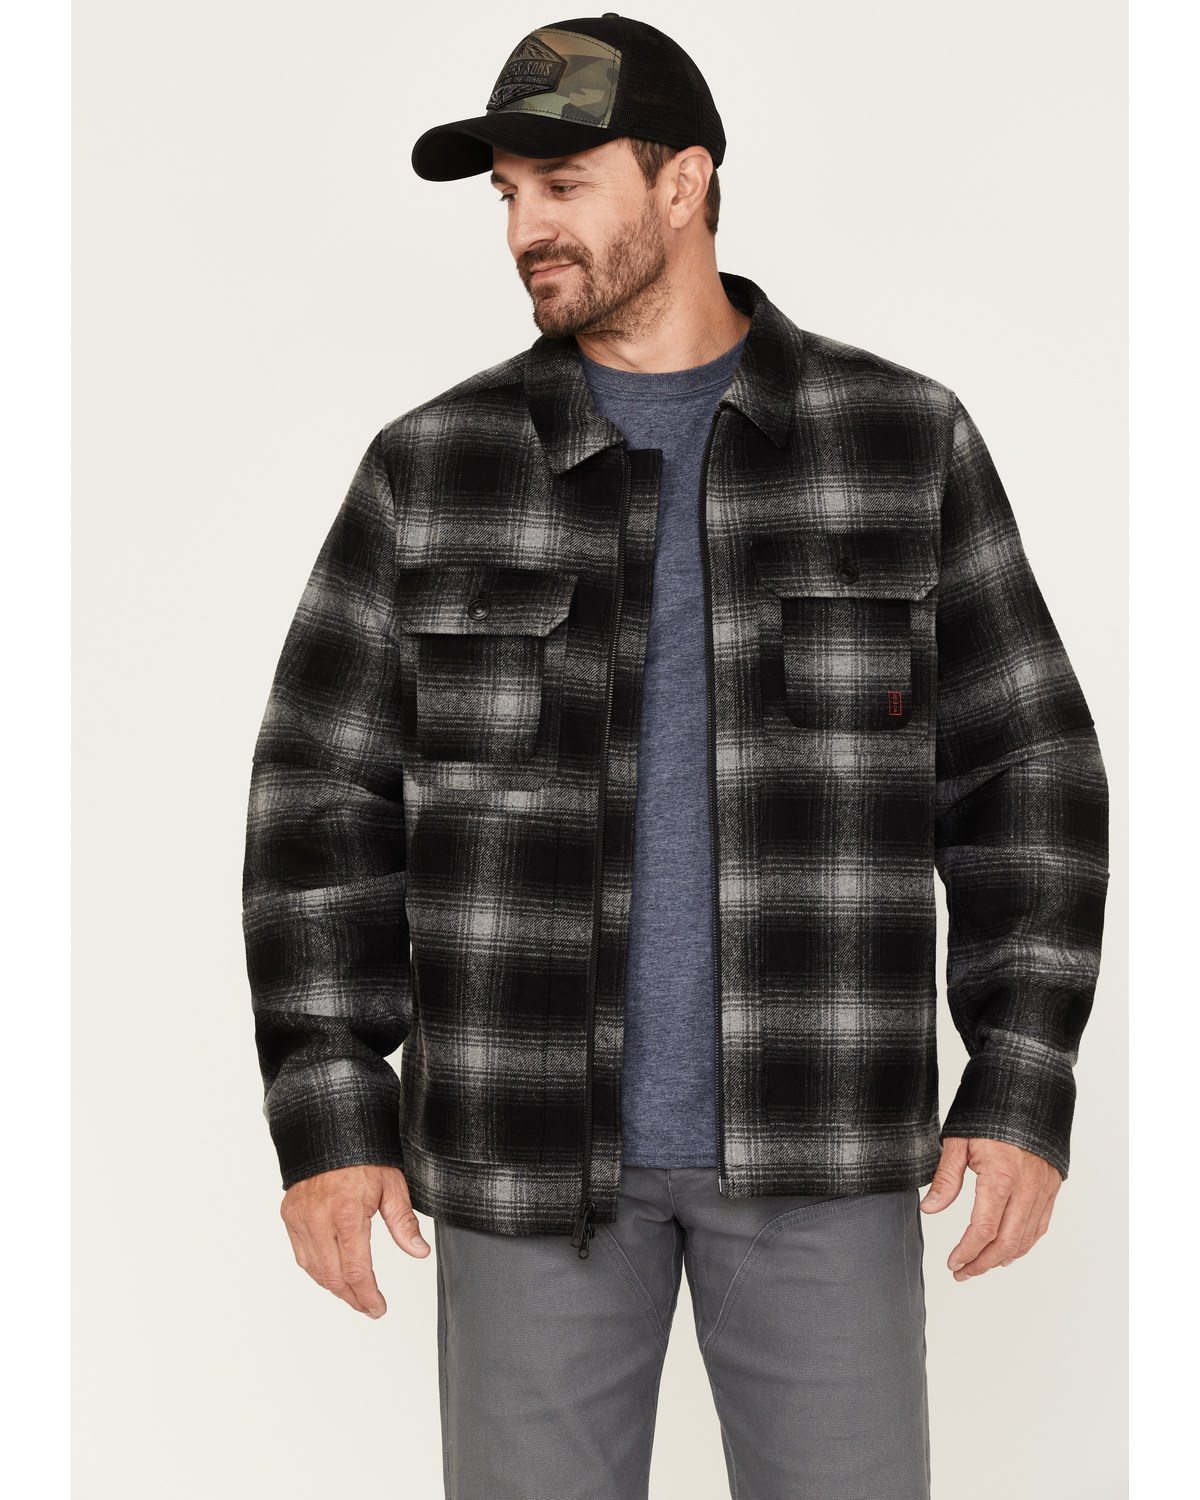 Brothers and Sons Men's Wool Full Zip Plaid Print Jacket